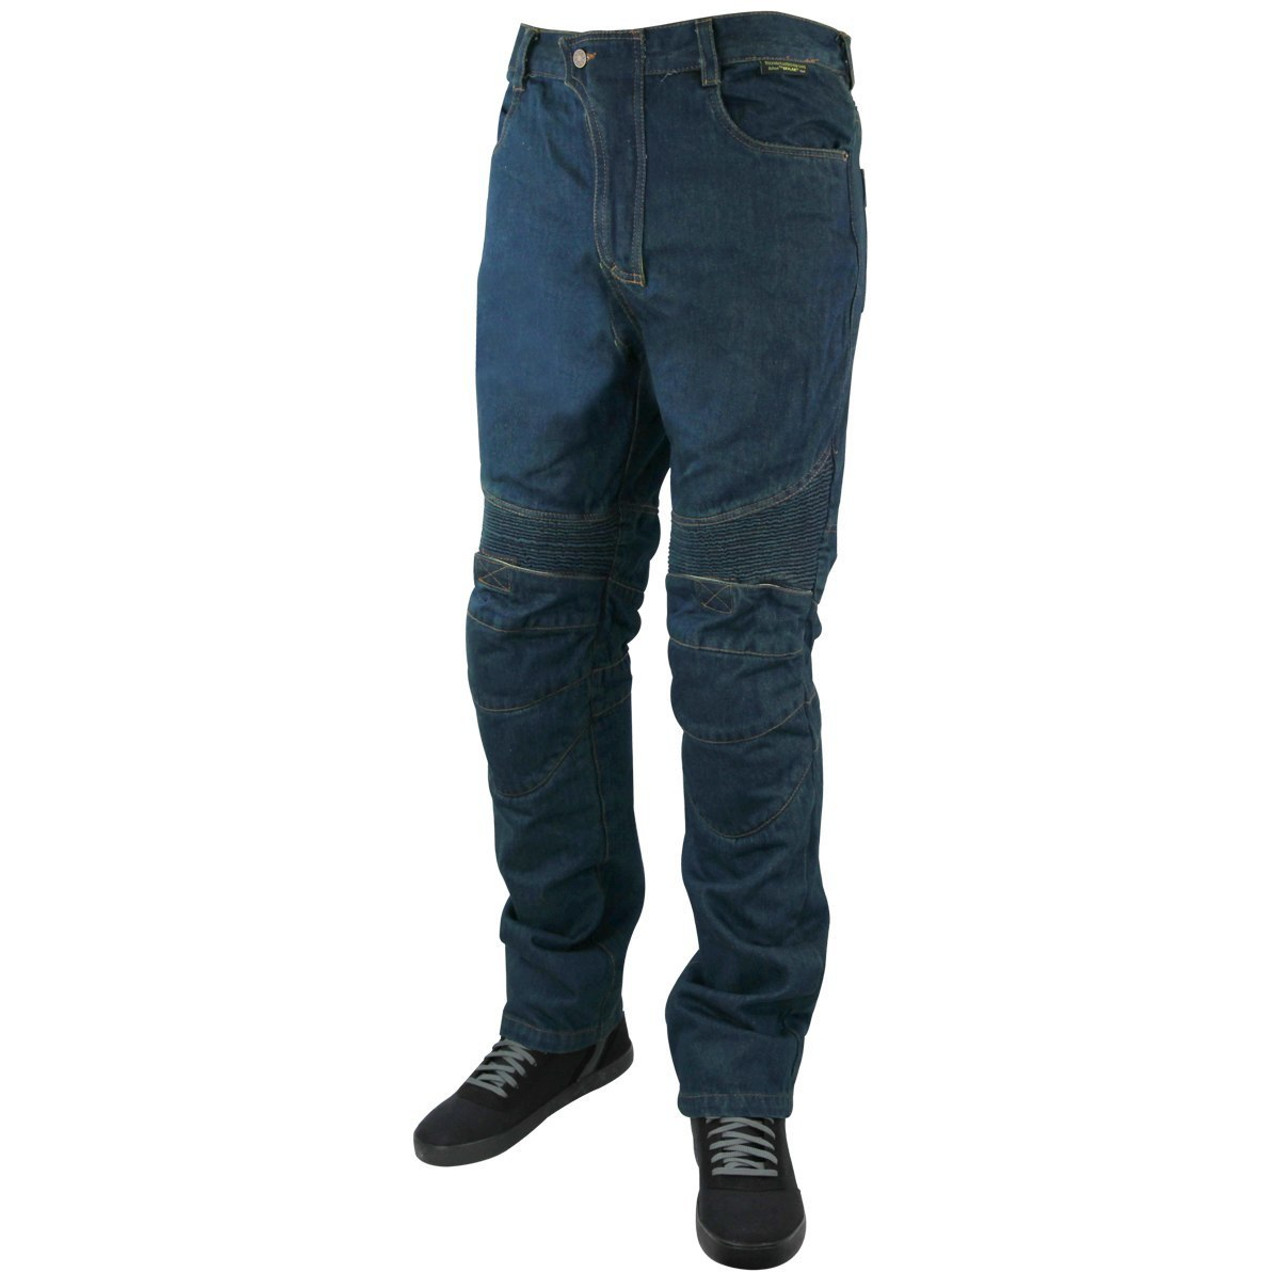 mens motorcycle jeans with armor